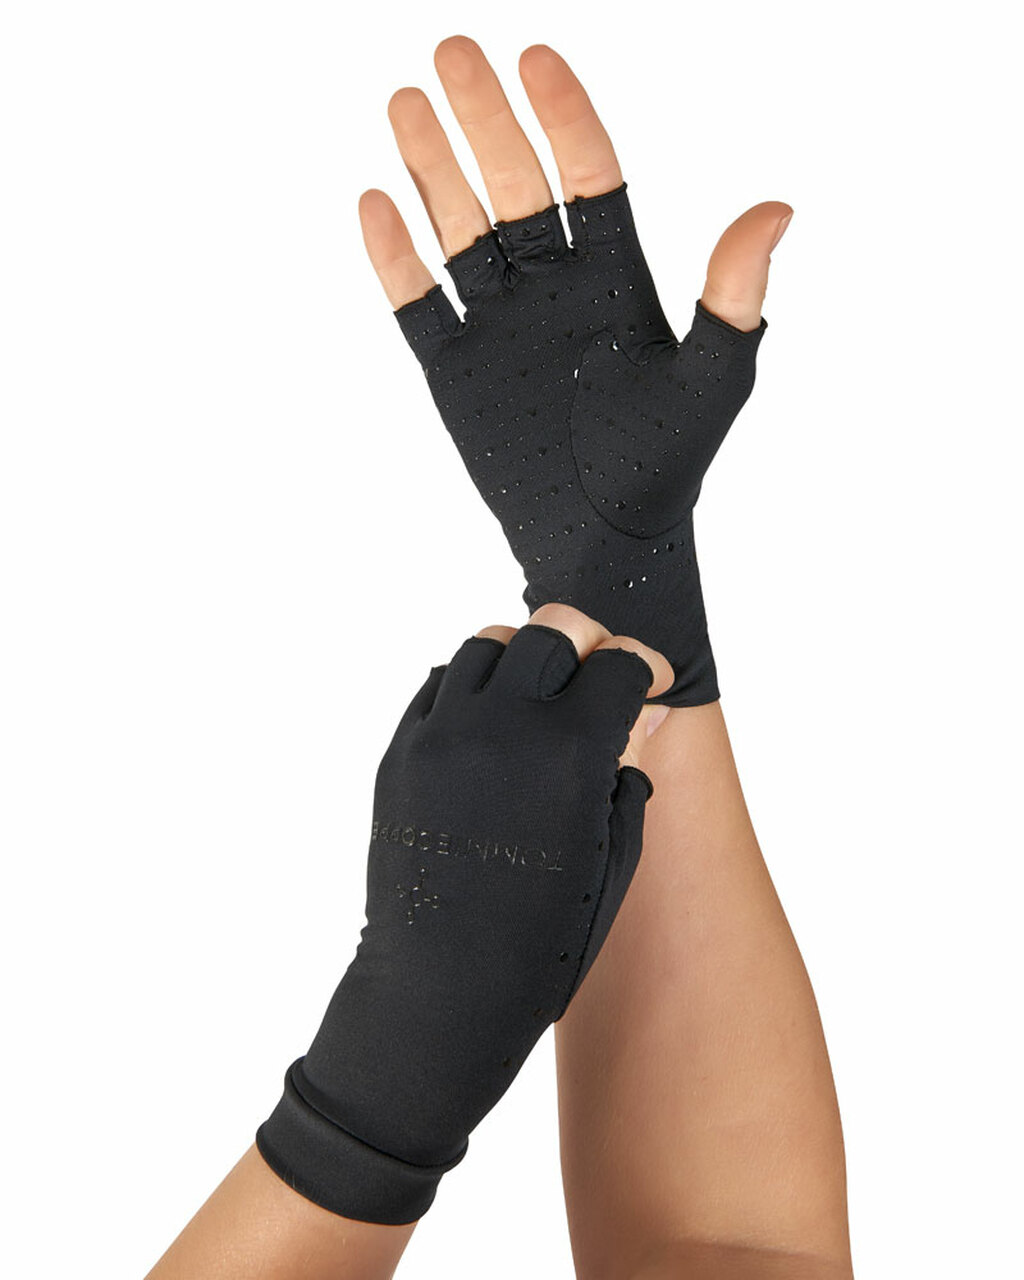 Tommie Copper Recovery Compression Half Finger Gloves Fit